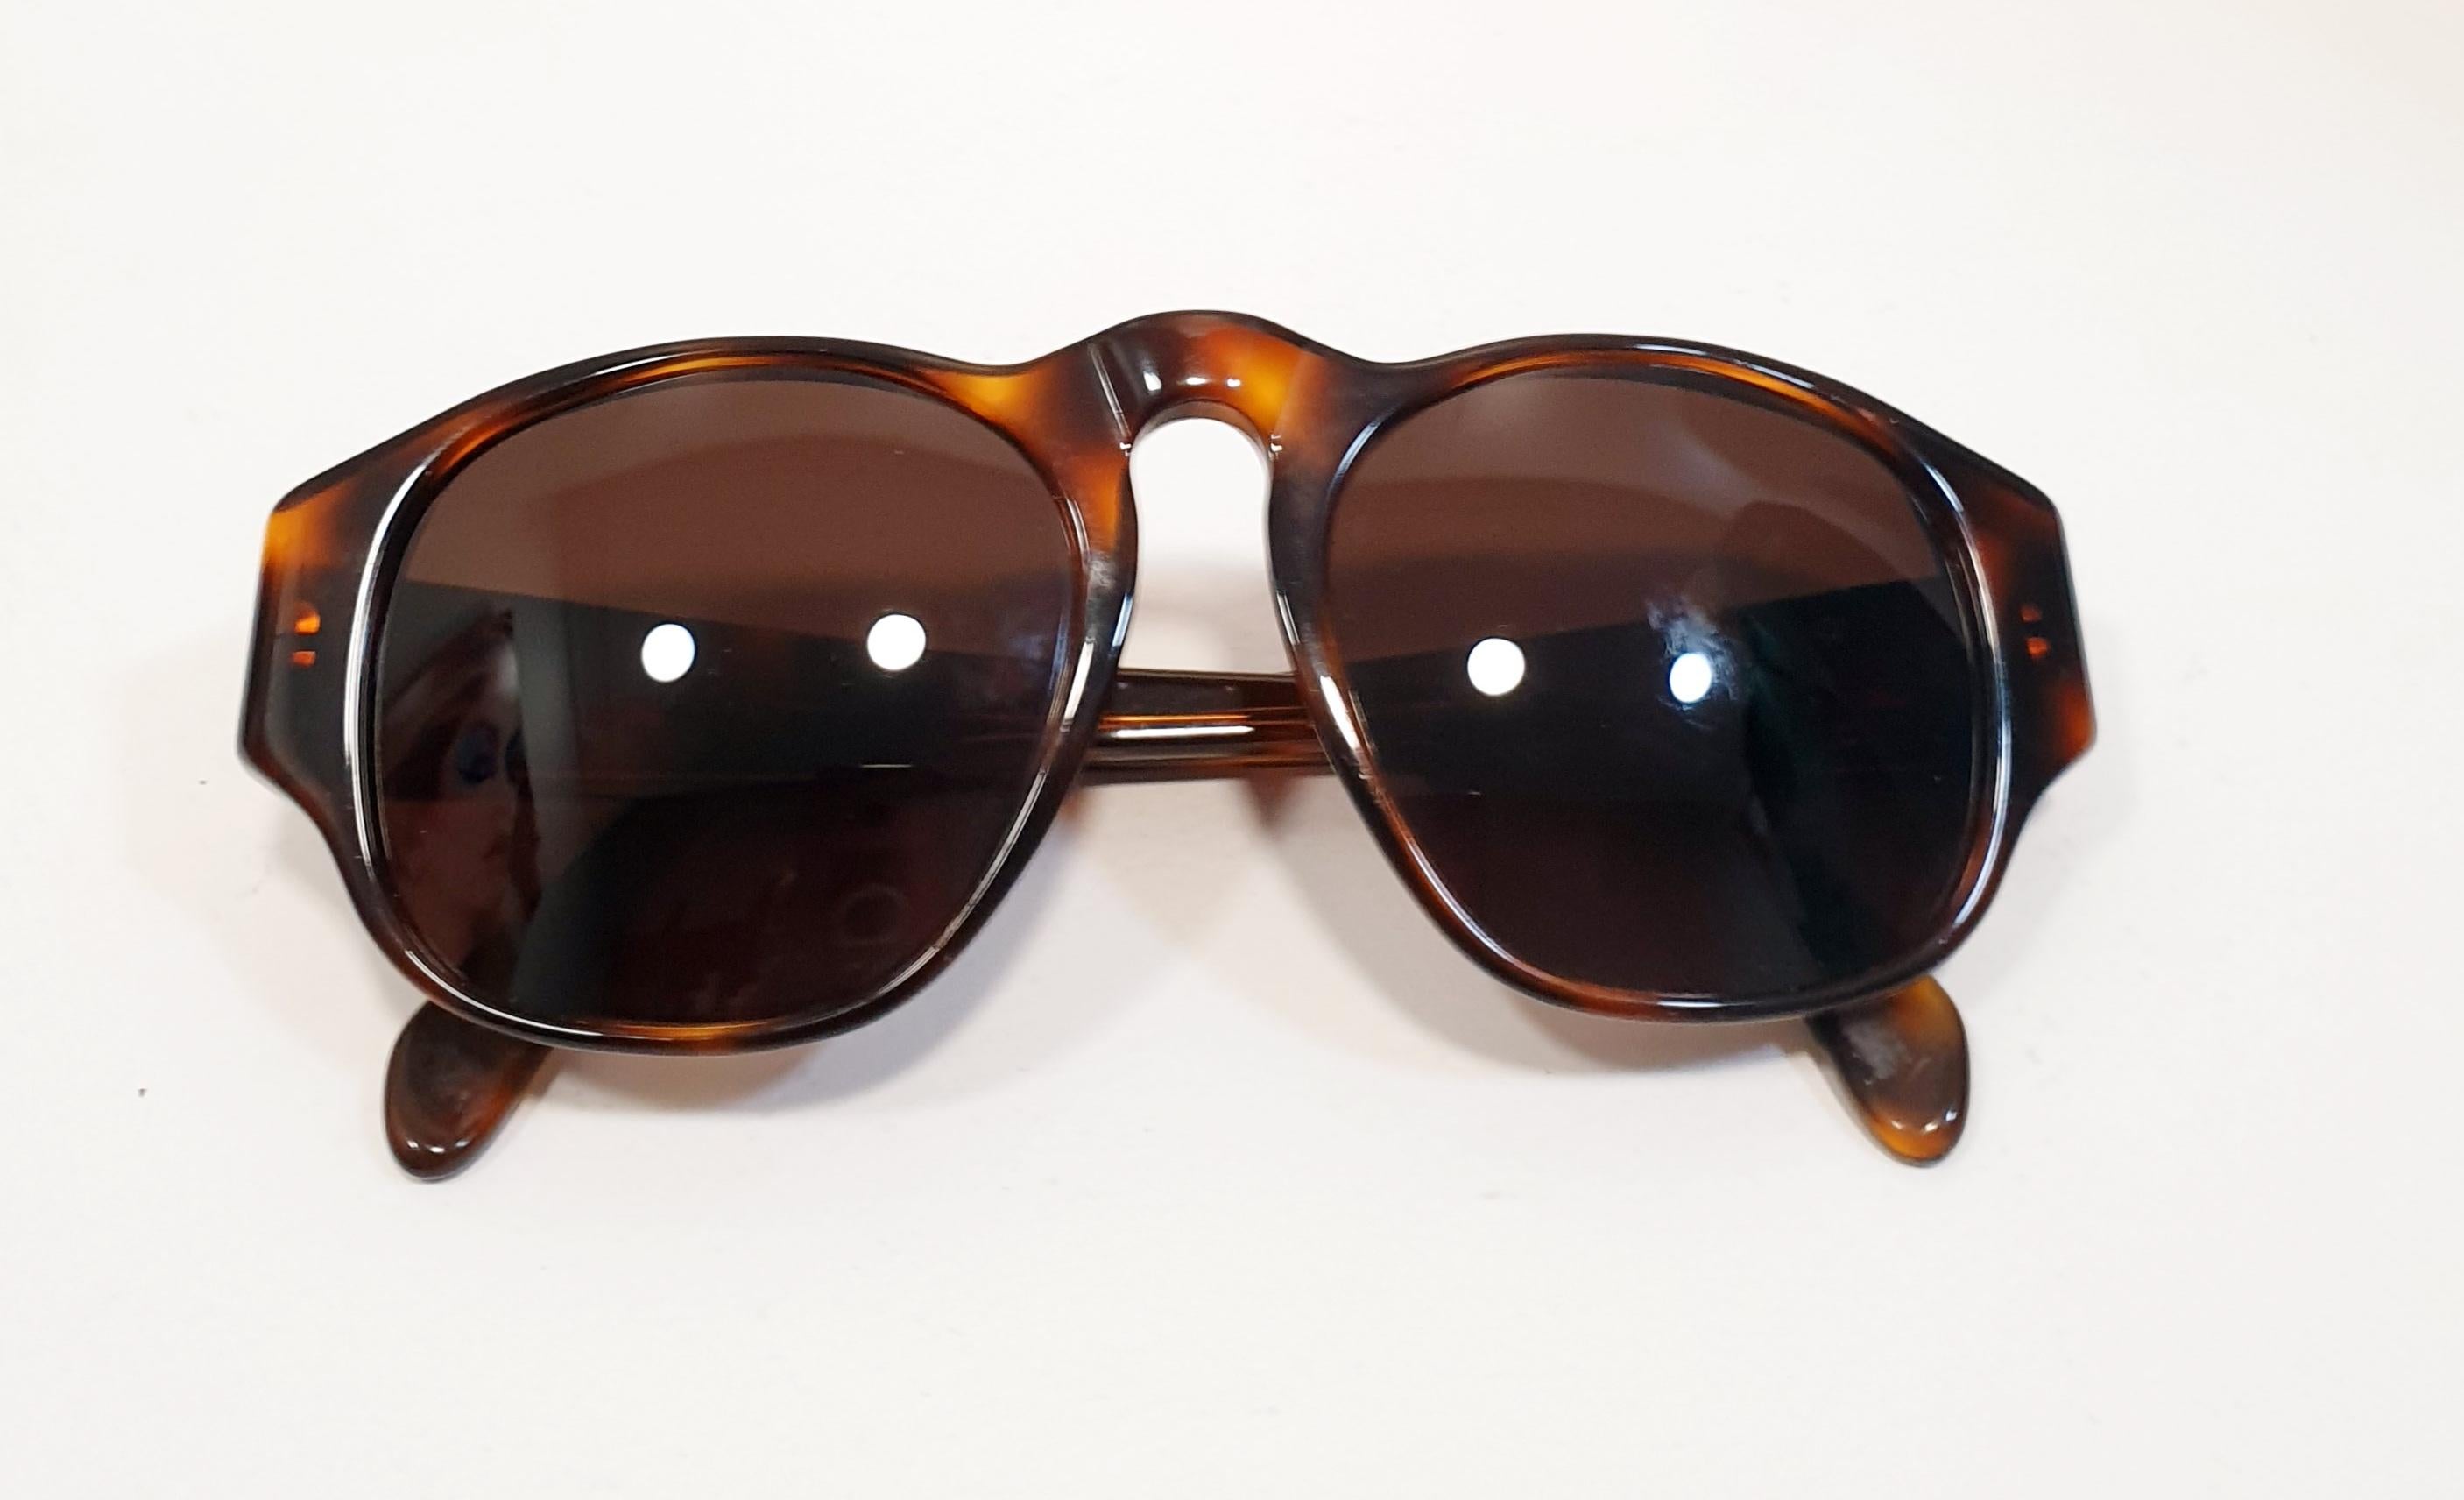 Chanel vintage sunglasses made in the late 1980s / early 1990s
Brand	Chanel
Color       Brown
Made in Italy
Material   Acetate
Model: 0006 80

READY TO SHIP
*Shipment of this piece is not affected by COVID-19. Orders welcome!*

Pradera Fashion